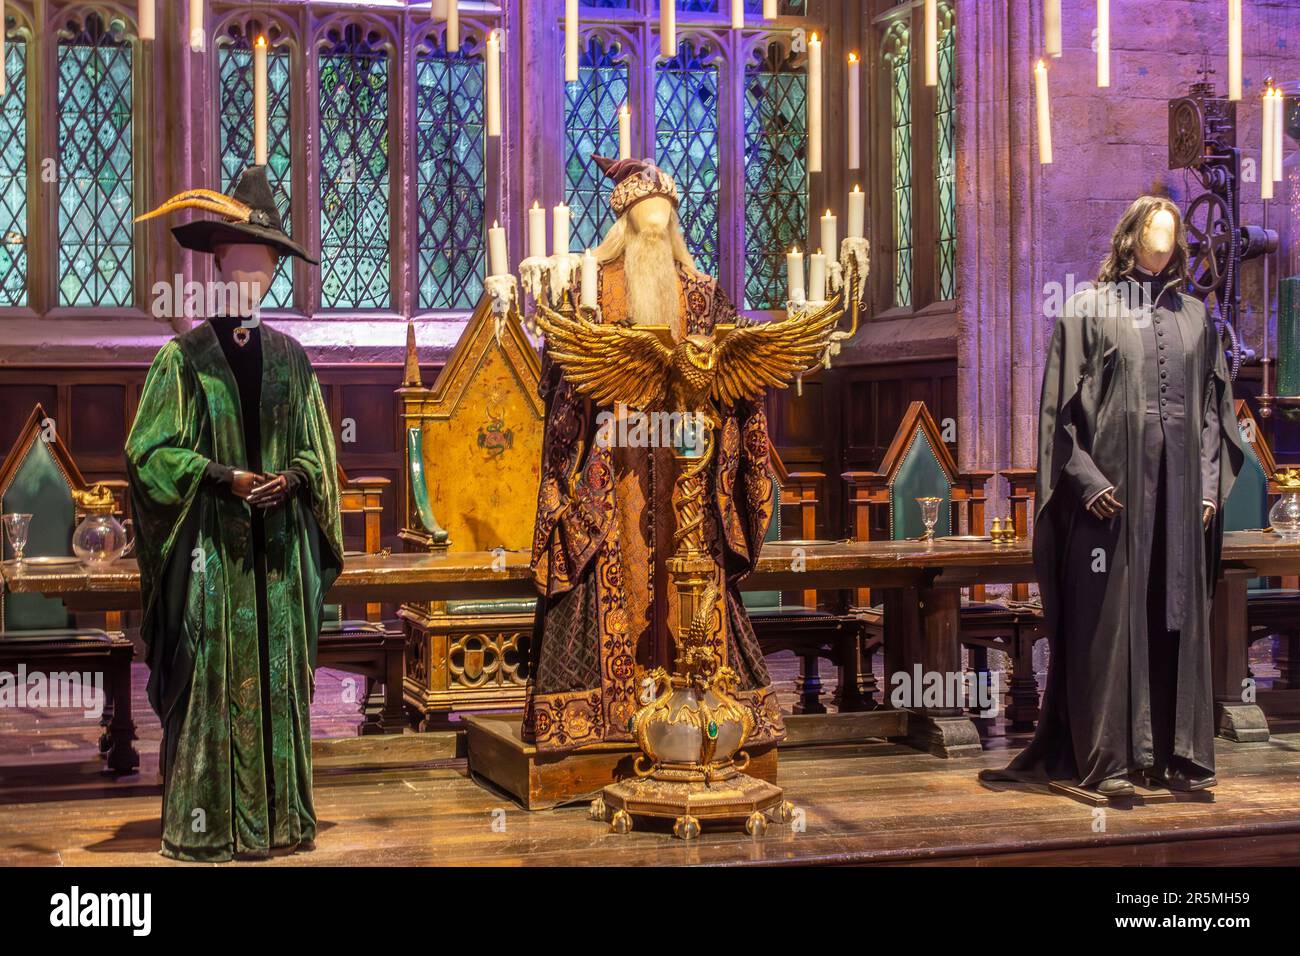 Snape, Dumbledore and McGonagall costumes worn by mannequins at the front of the Great Hall set on the Harry Potter studio tour in Watford, UK Stock Photo